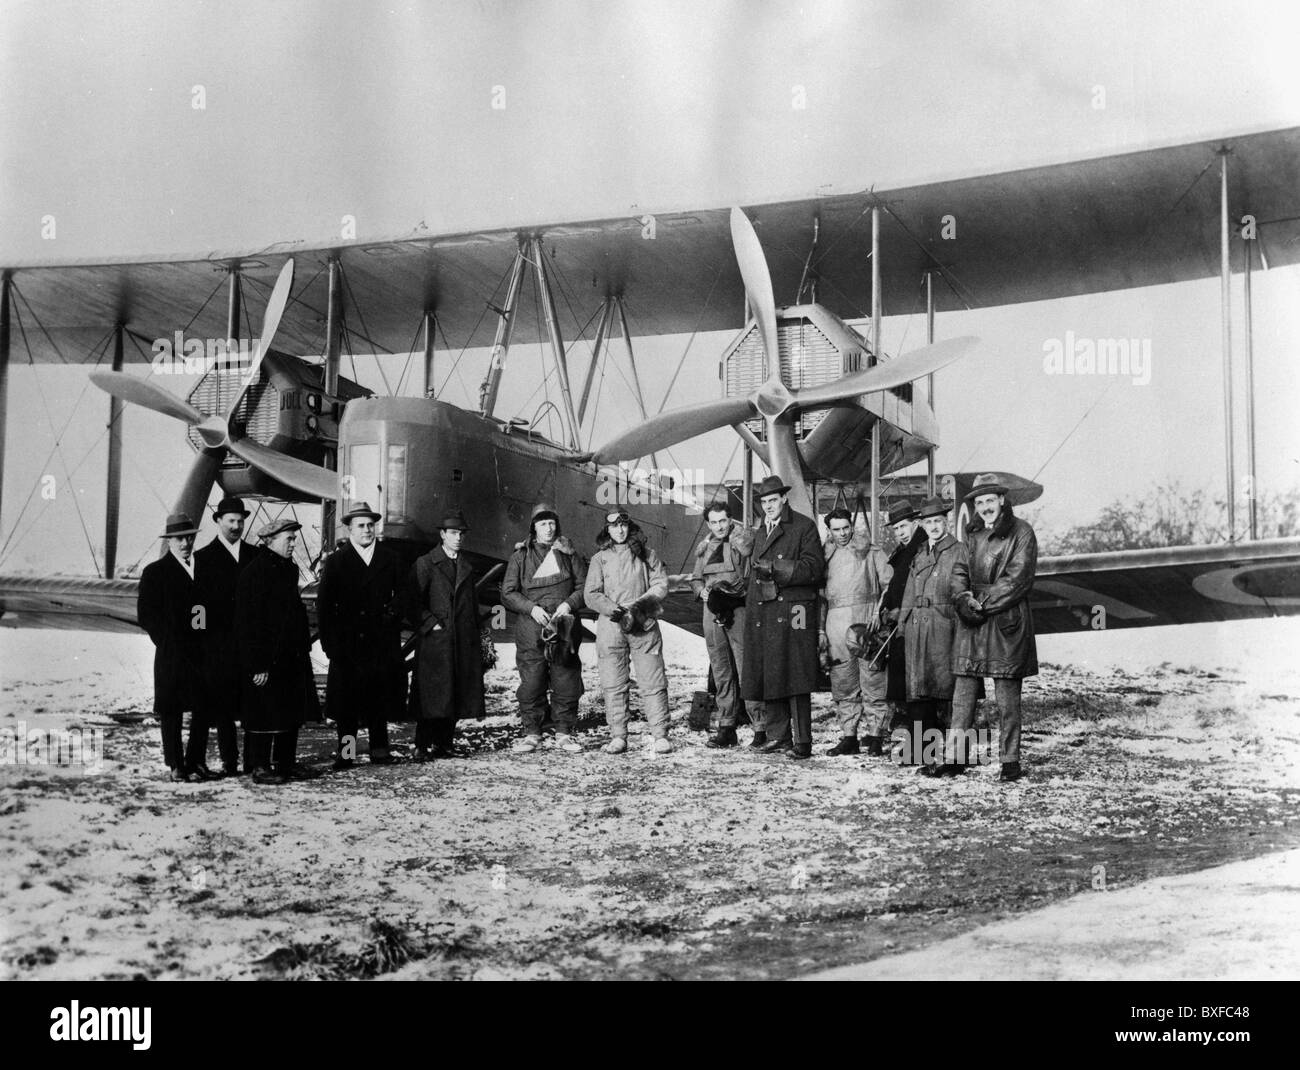 Smith, James MacPherson, 20.12.1890 - 19.12.1955, Australian flyer, with brother Ross, Jim Bennett and Wally Shiers, prior to their long distance flight to Australia, Hounslow, London, 12.11.1919, , Stock Photo